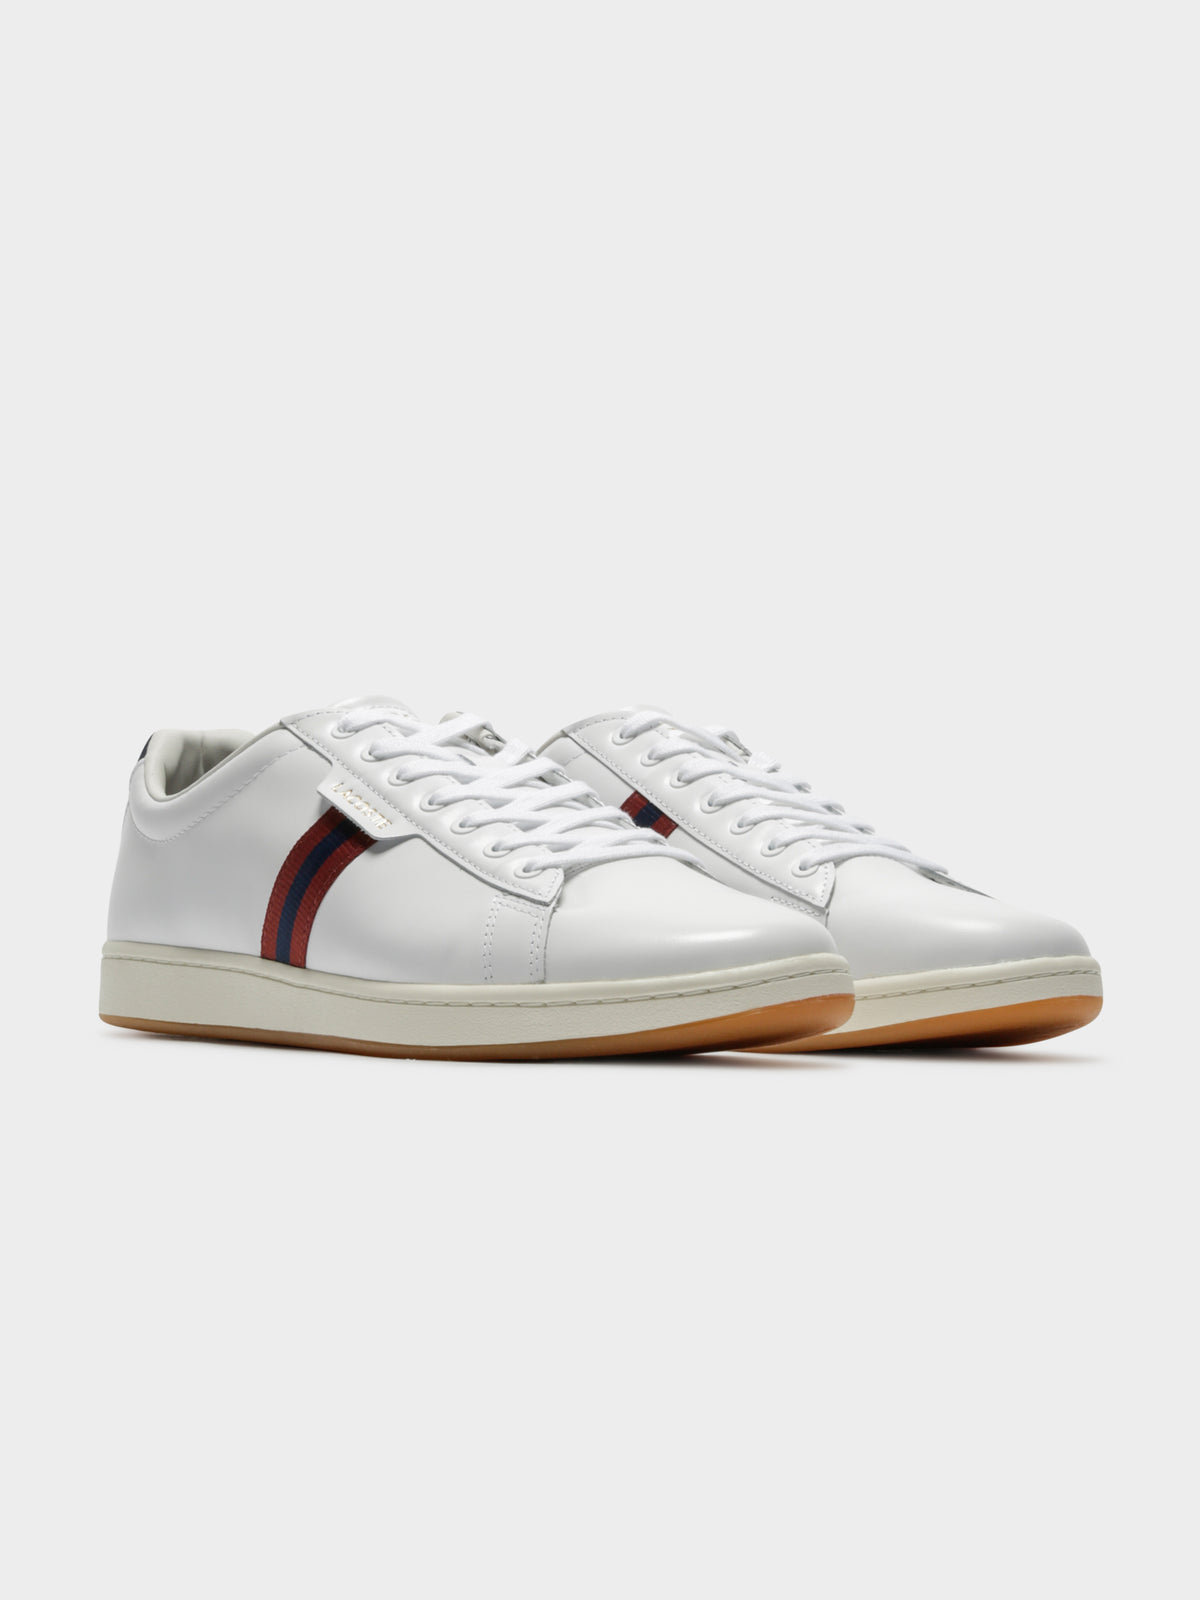 Leather Carnaby Evo 419 Sneaker in White Red &amp; Navy